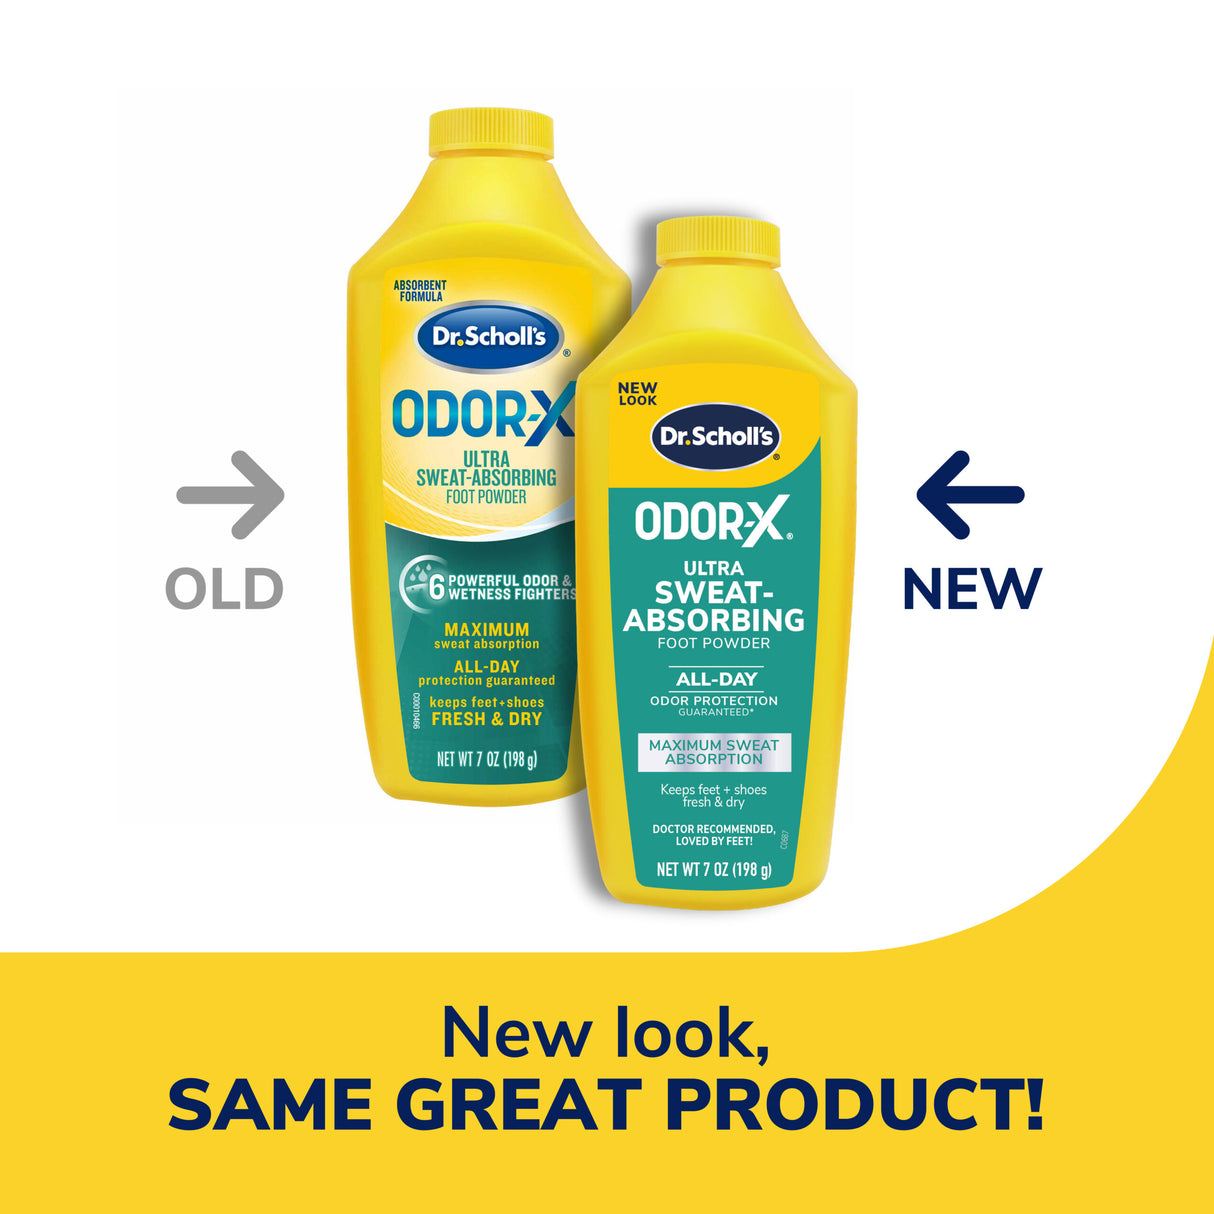 image of new look same great product